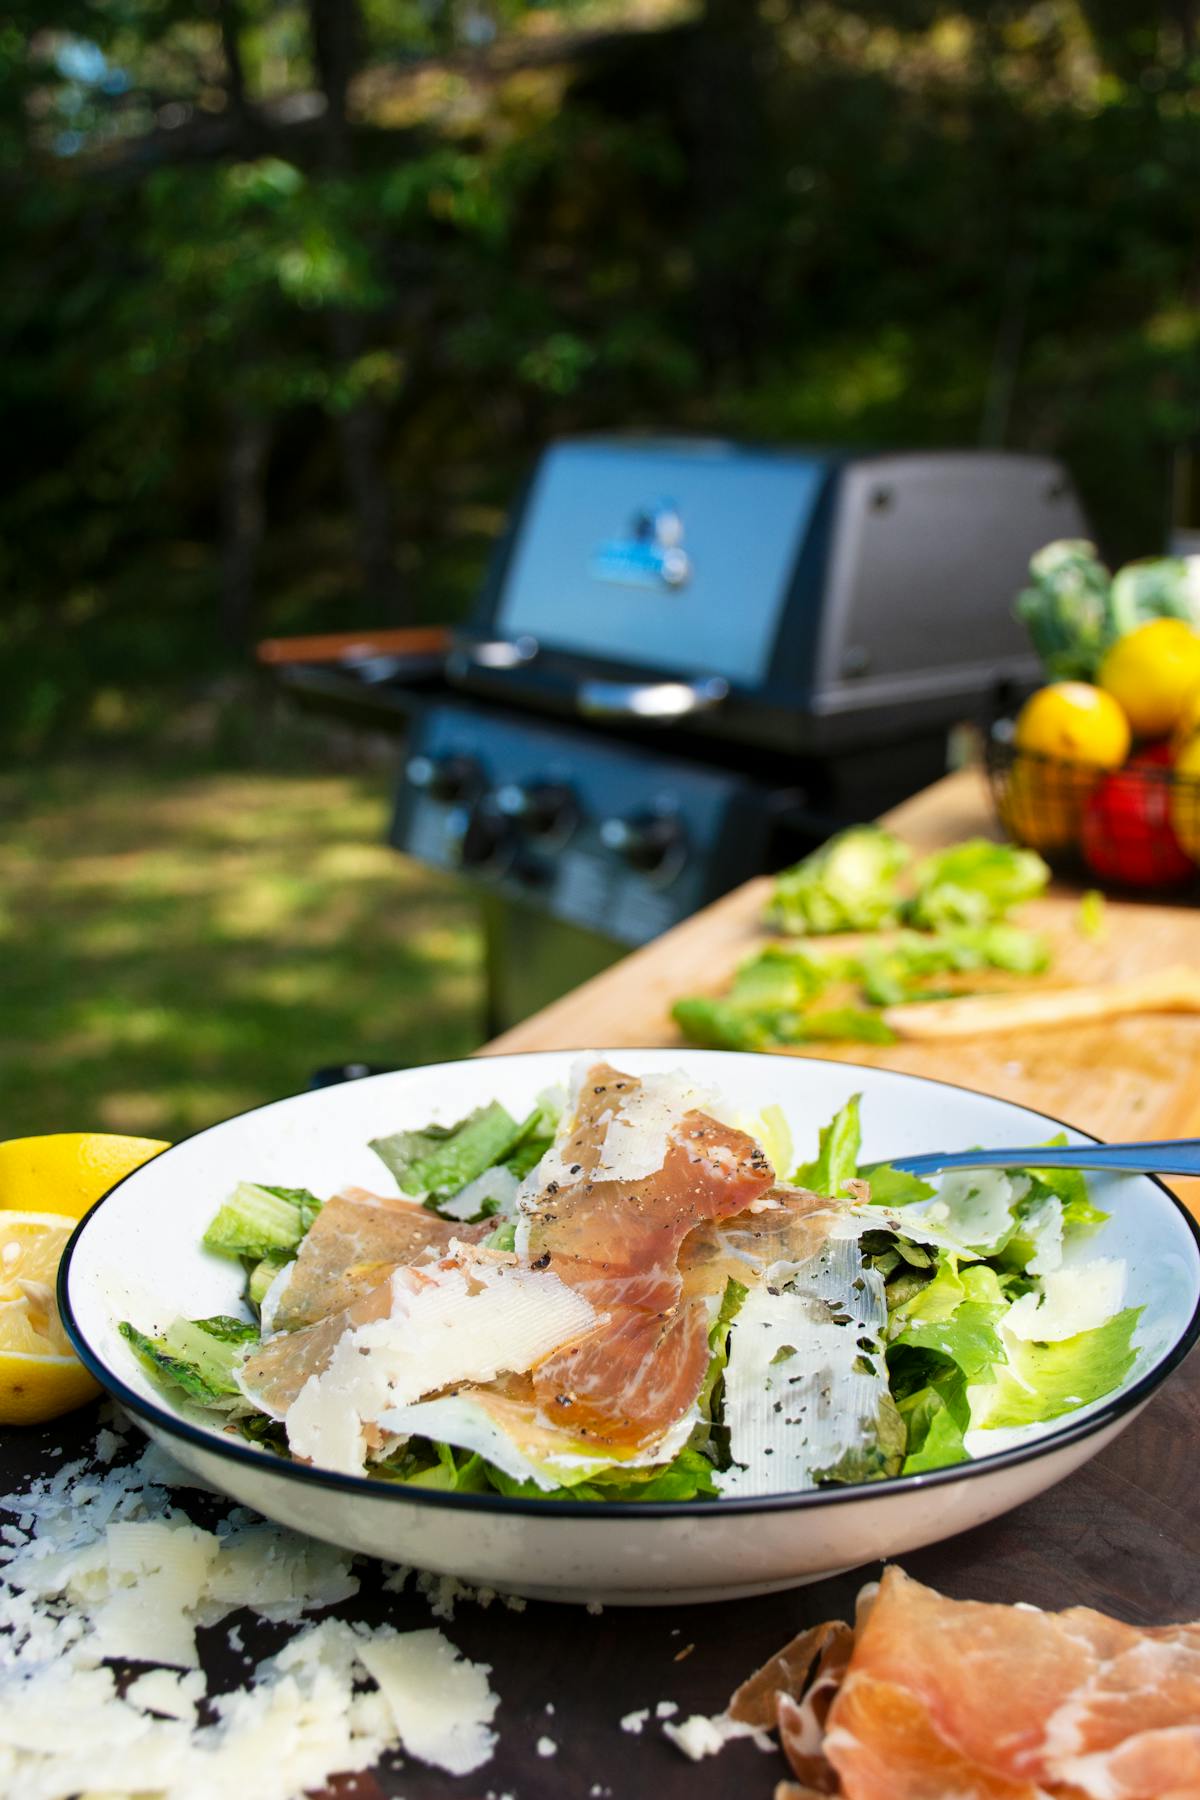 Prosciutto and manchego cheese grilled salad